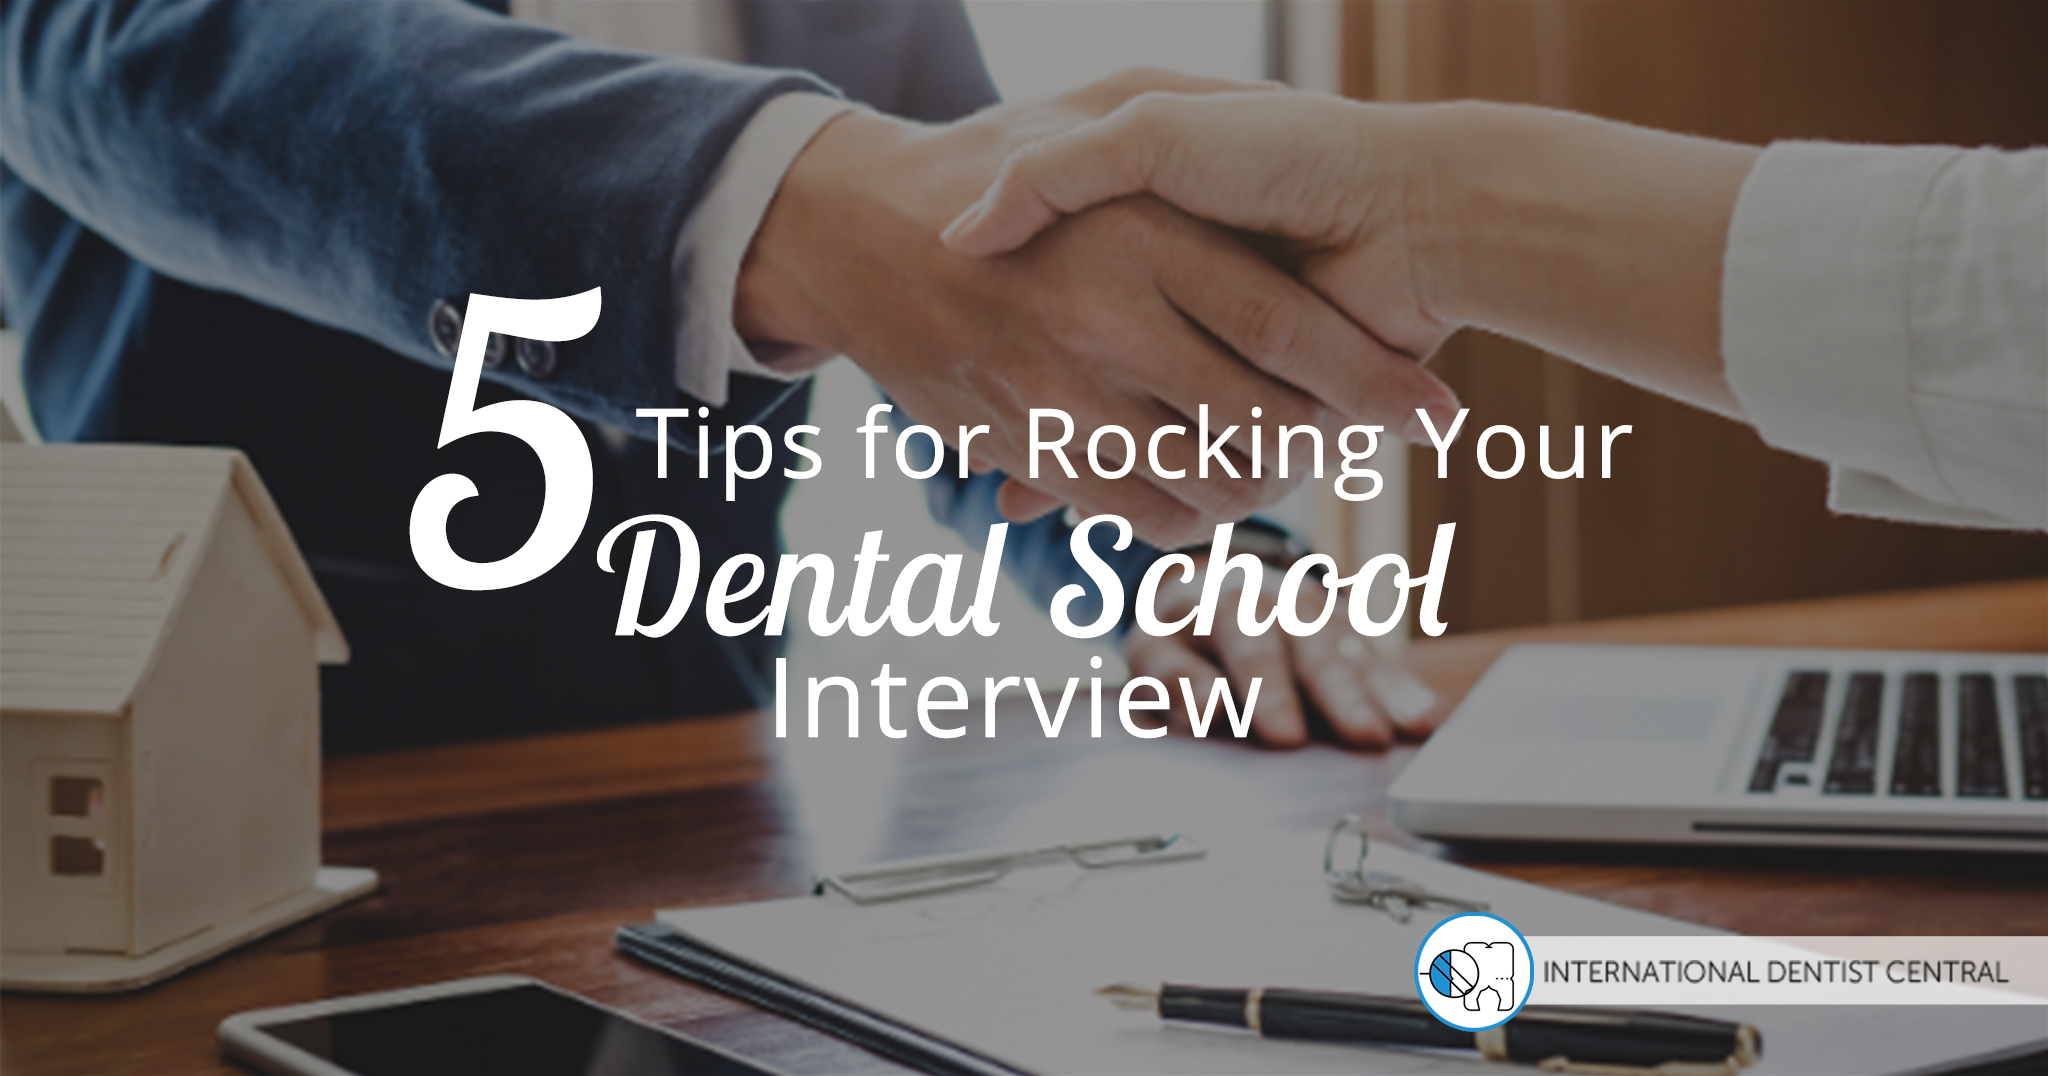 5 tips for rocking your dental school interview